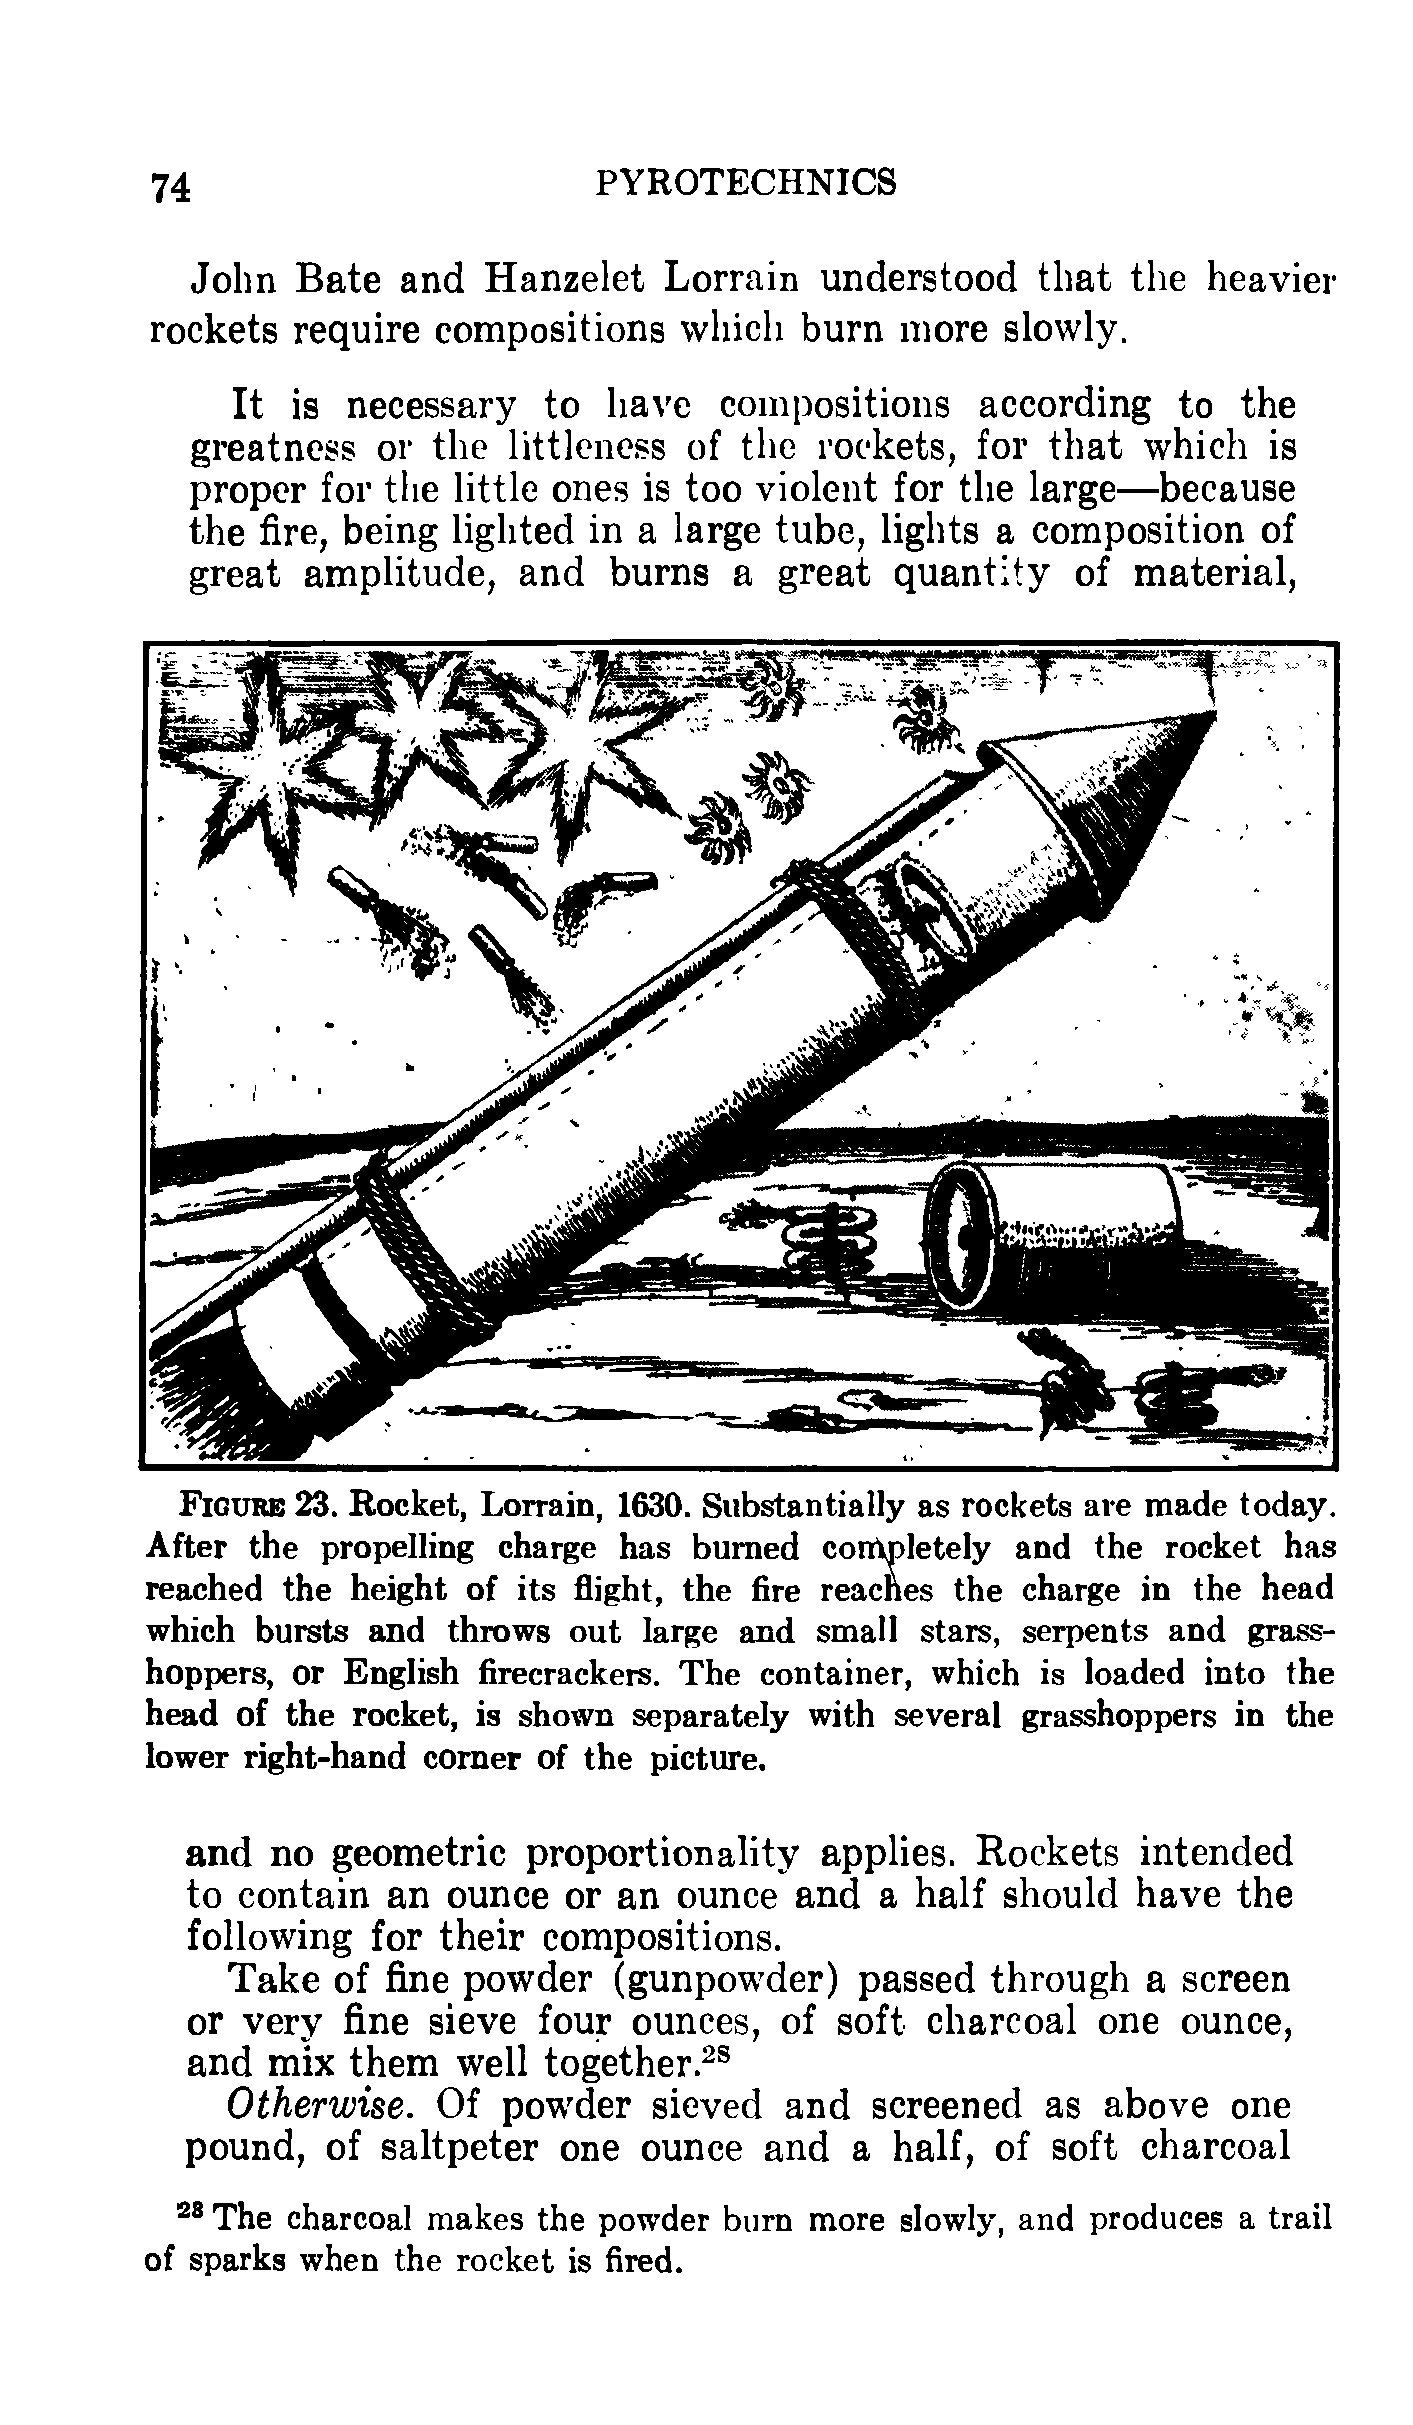 Figure 23. Rocket, Lorrain, 1630. Substantially as rockets are made today. After the propelling charge has burned completely and the rocket has reached the height of its flight, the fire reaches the charge in the head which bursts and throws out large and small stars, serpents and grasshoppers, or English firecrackers. The container, which is loaded into the head of the rocket, is shown separately with several grasshoppers in the lower right-hand comer of the picture.